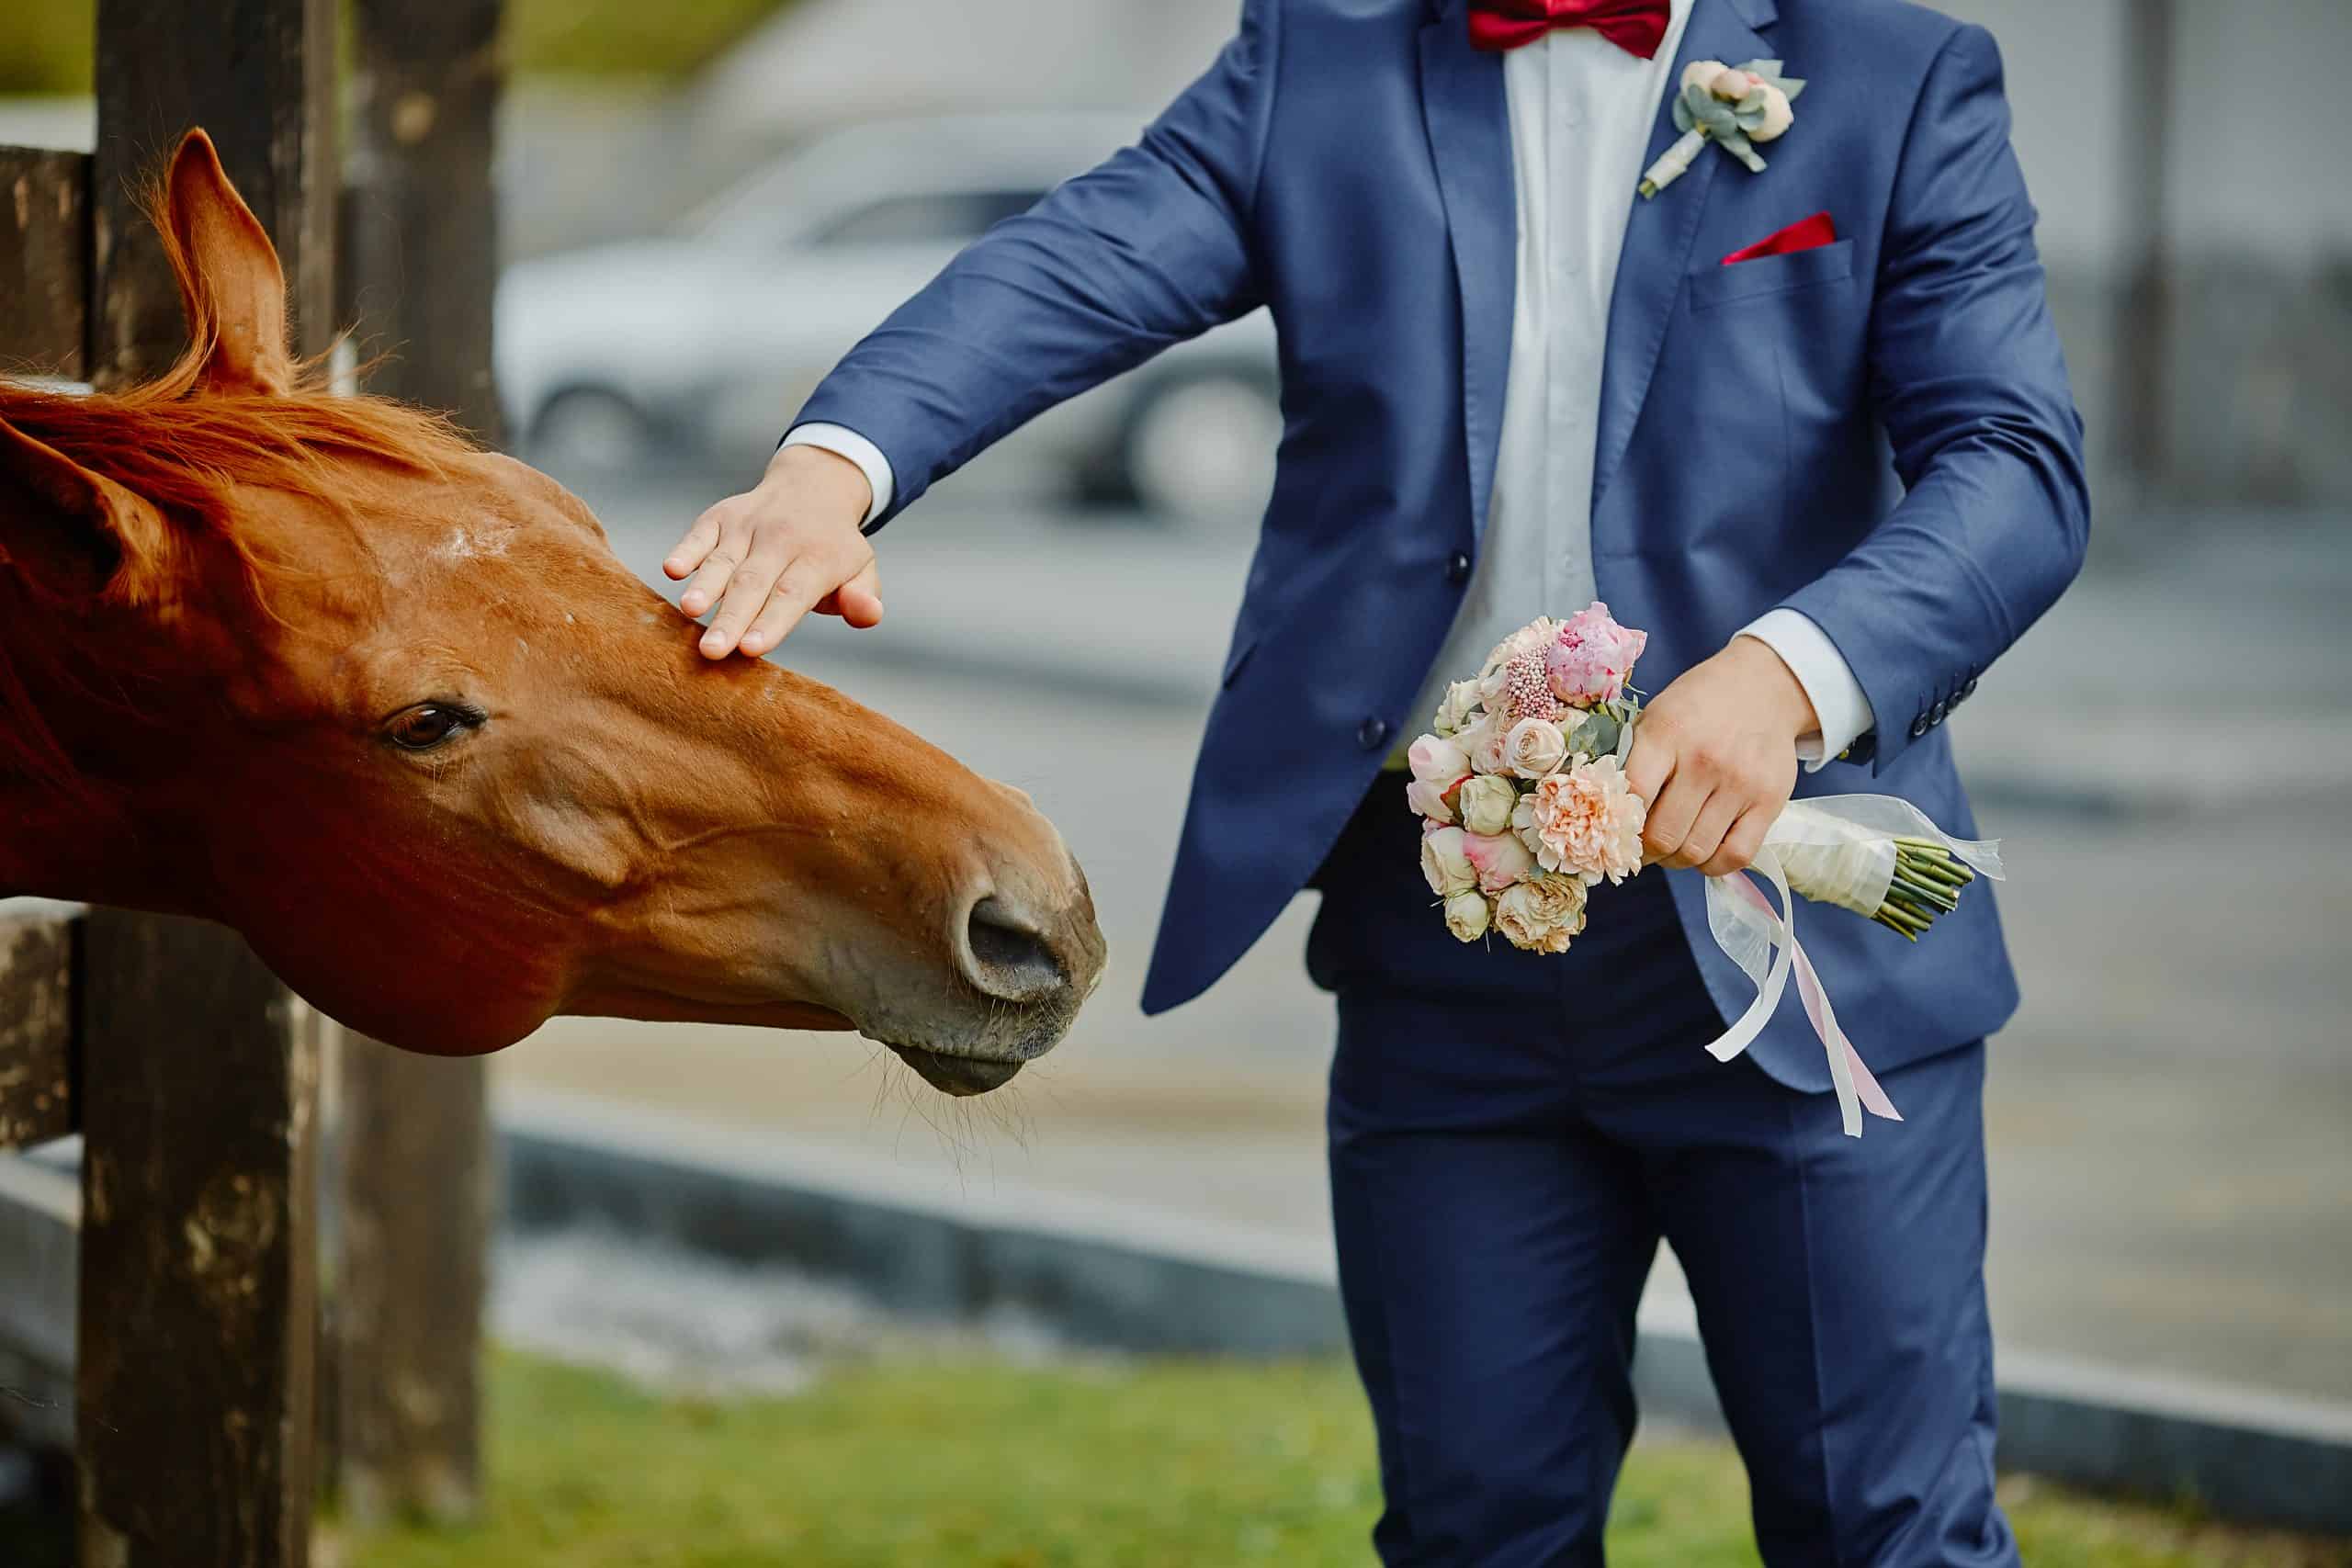 The groom, holding a wedding bouquet in hand, and a horse, who reached out to the bouquets to smell and eat.Funny wedding moment.